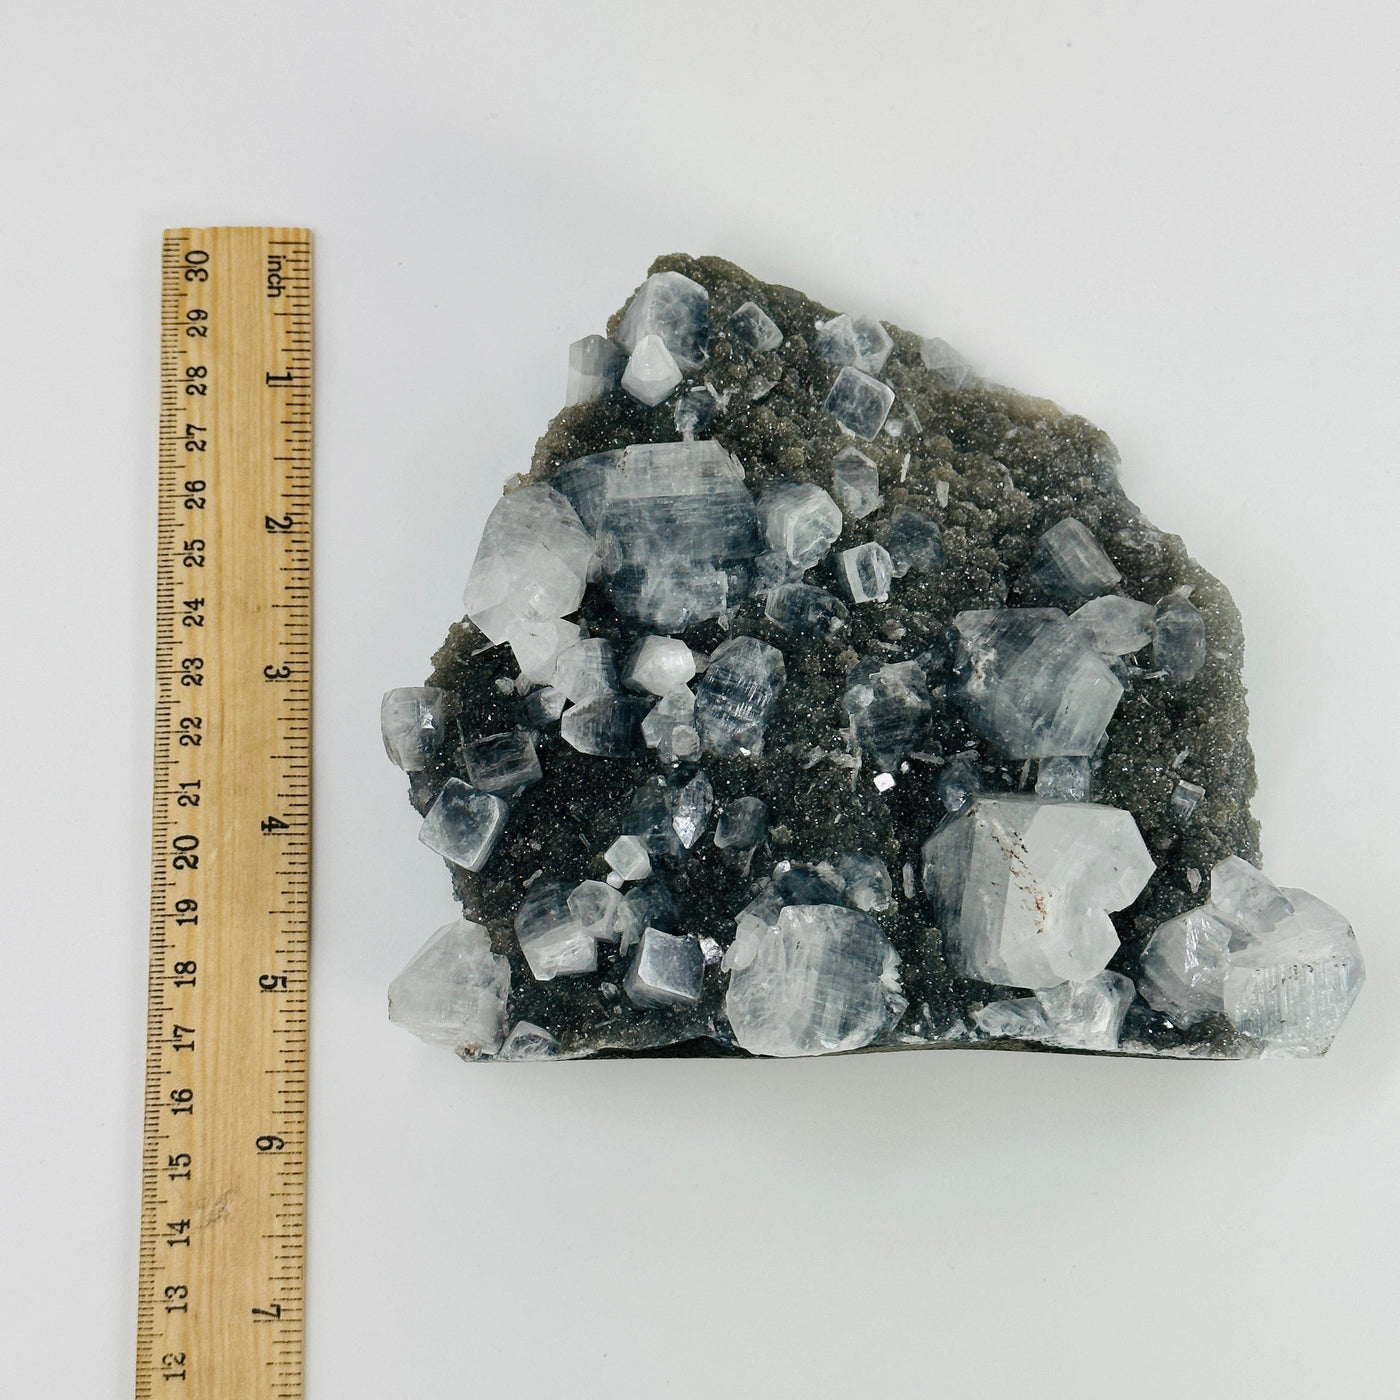 apophyllite cut base next to a ruler for size reference 